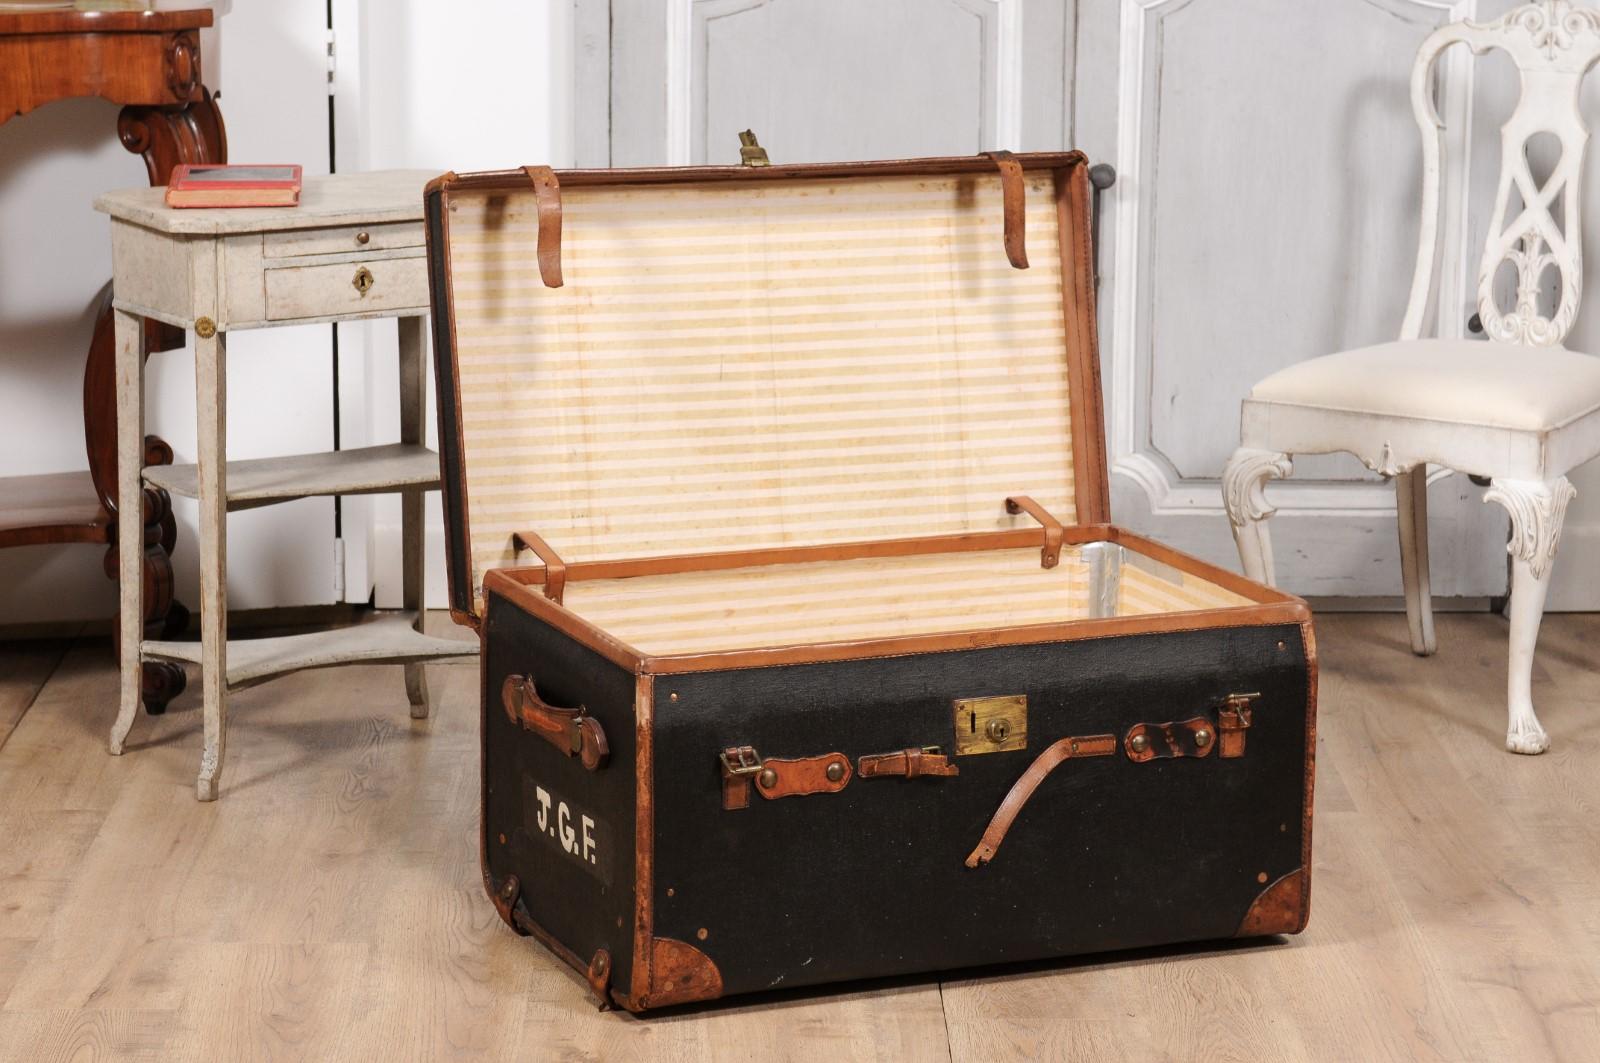 English Victorian Period 19th Century Black Traveling Trunk With Initials J.G.F. For Sale 2